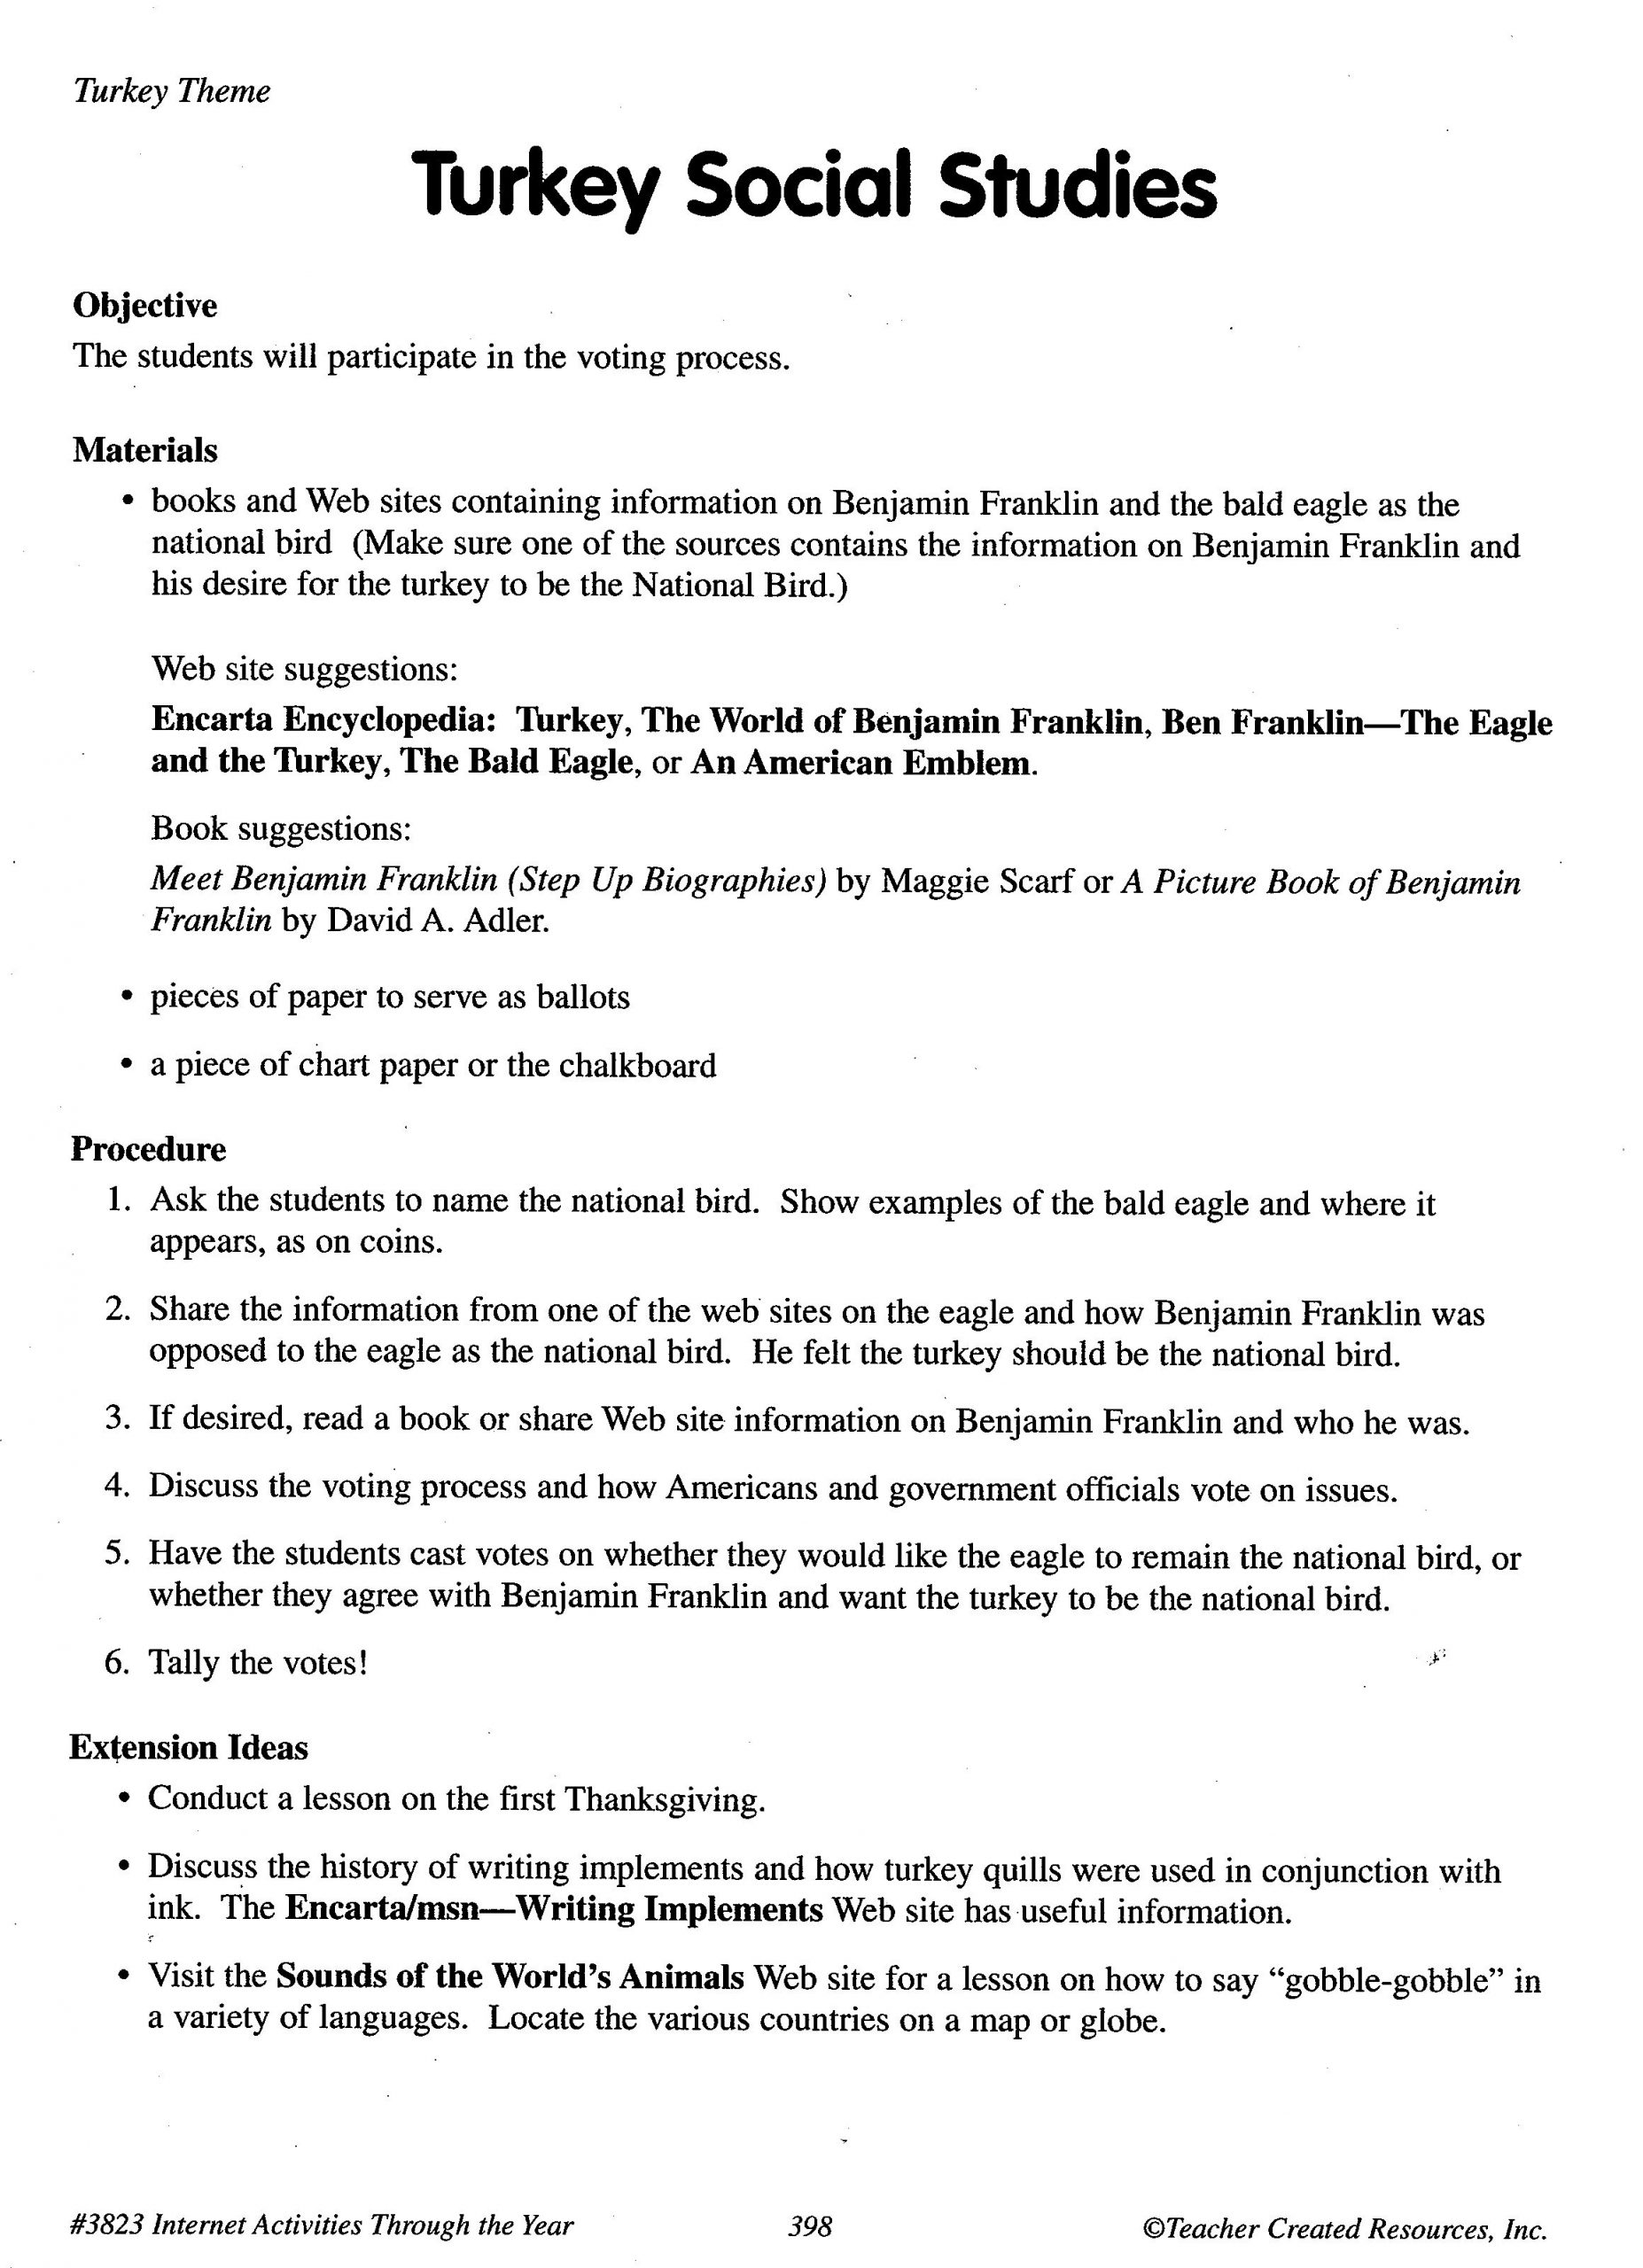 Turkey Social Studies Lesson Plan - Students Learn About